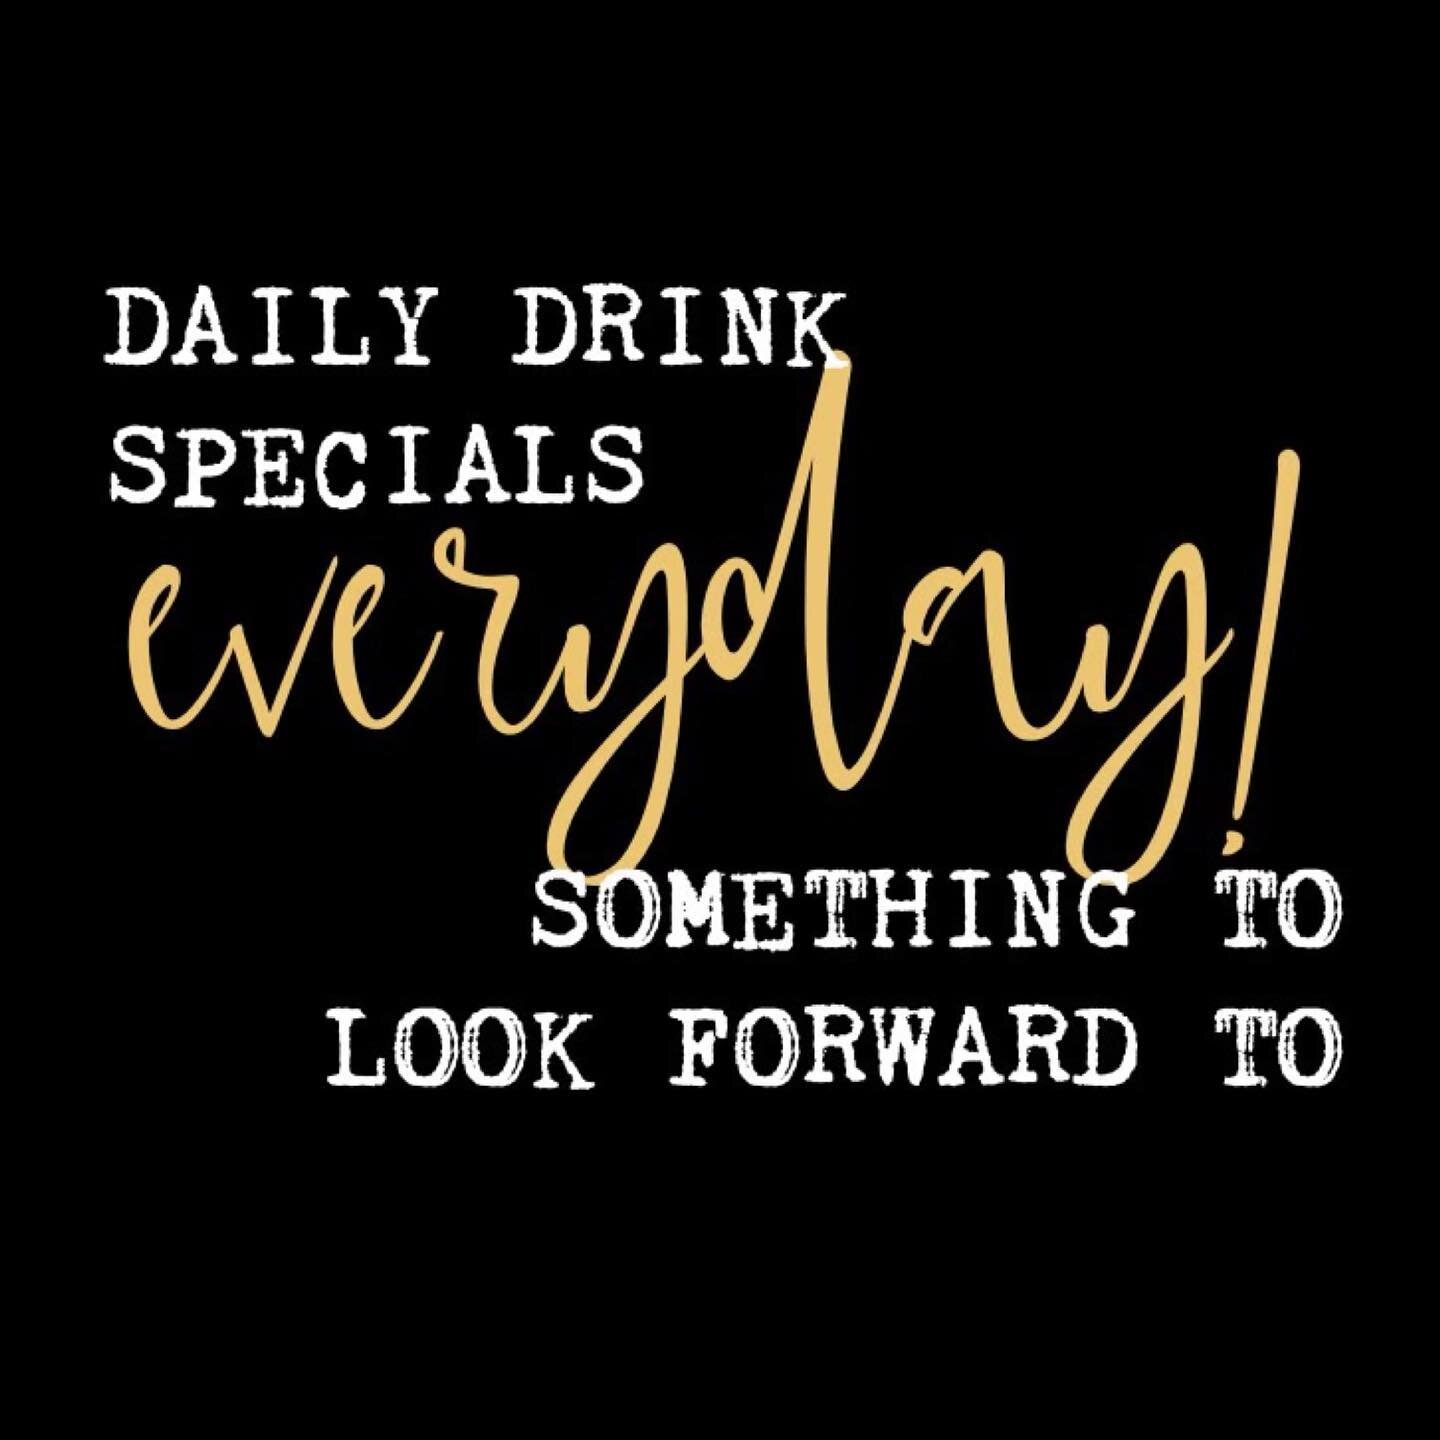 Just for you! ❤️
You deserve a drink! 🍻
Something to look forward to! 🍾 
See you soon! ✌️

#fortlauderdalefoodies #wiltonmanors #fortlauderdale #foodies #oaklandpark #broward #miami #southfloridaeats #pompanobeach #food #chef #frenchfries #craftcoc